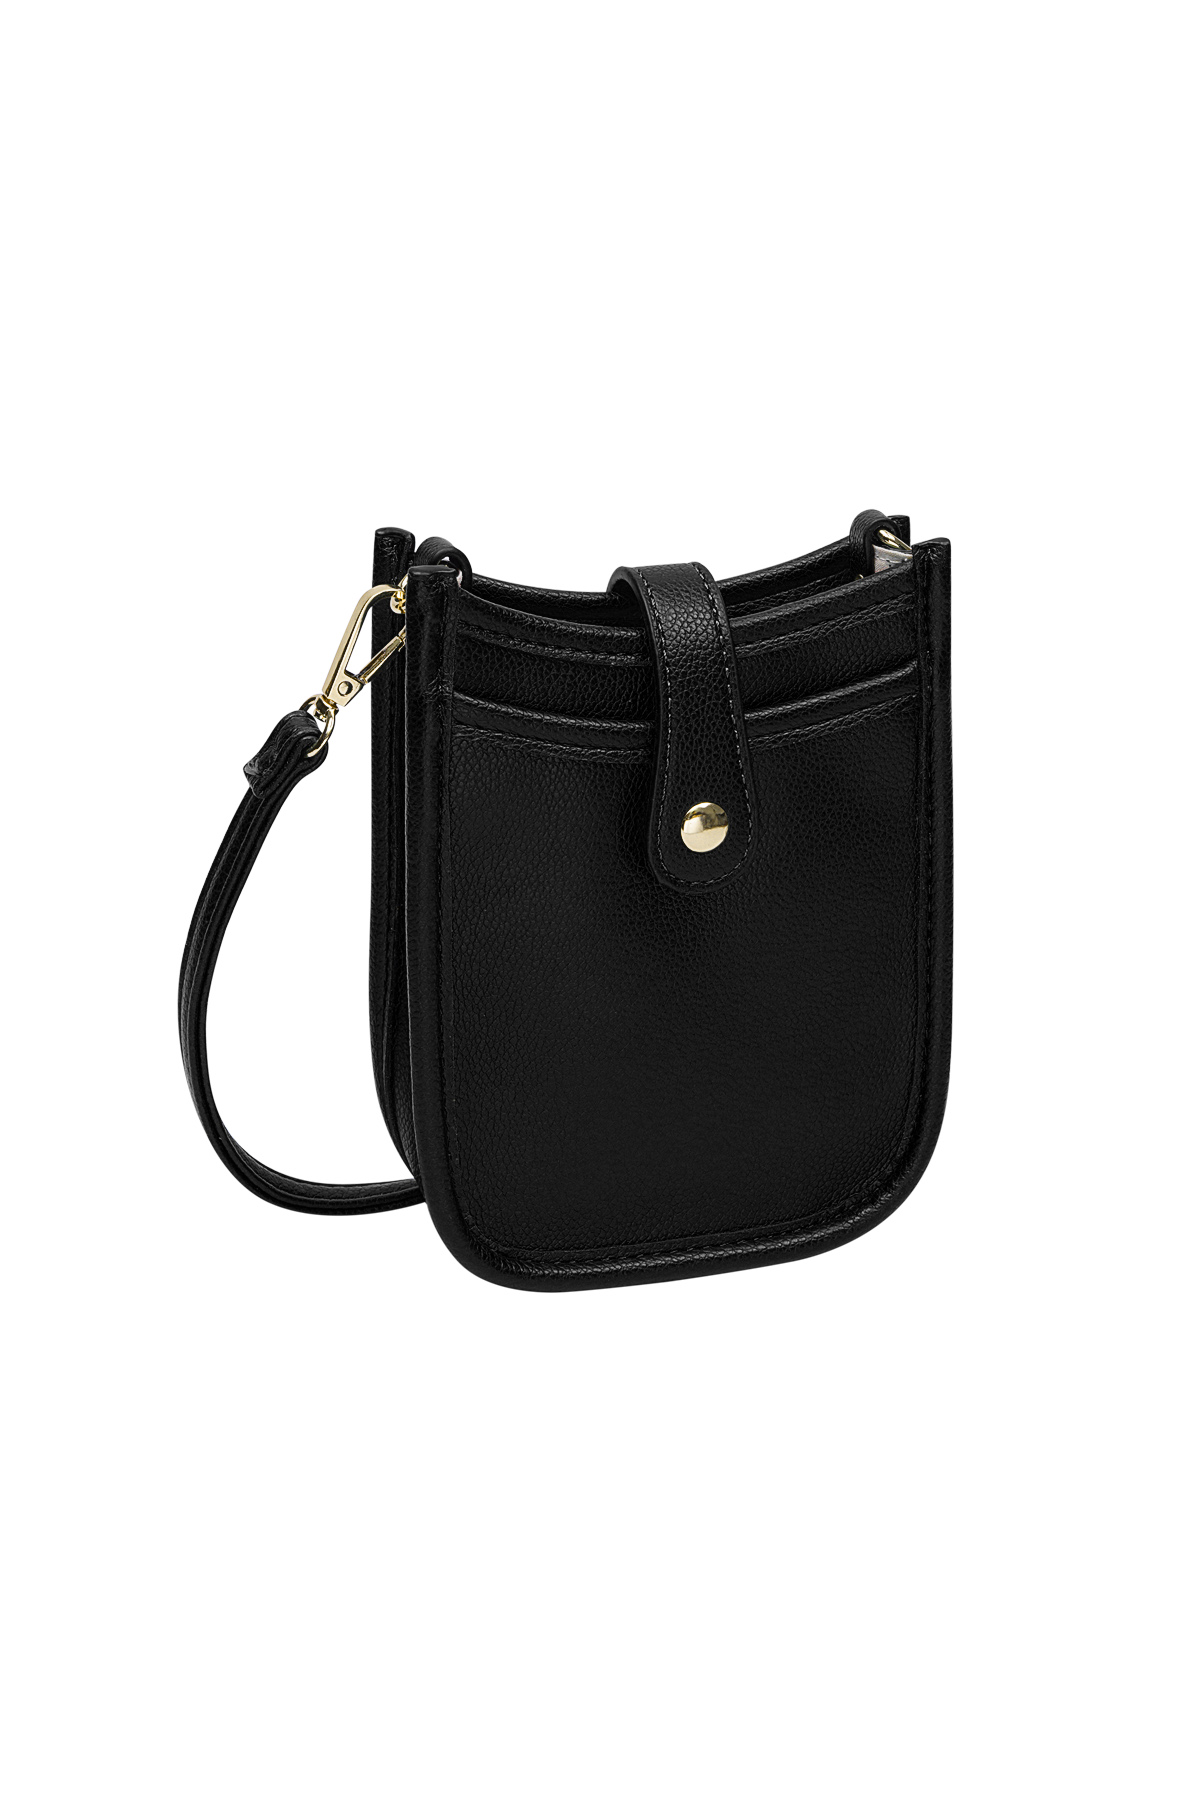 City bag with button black